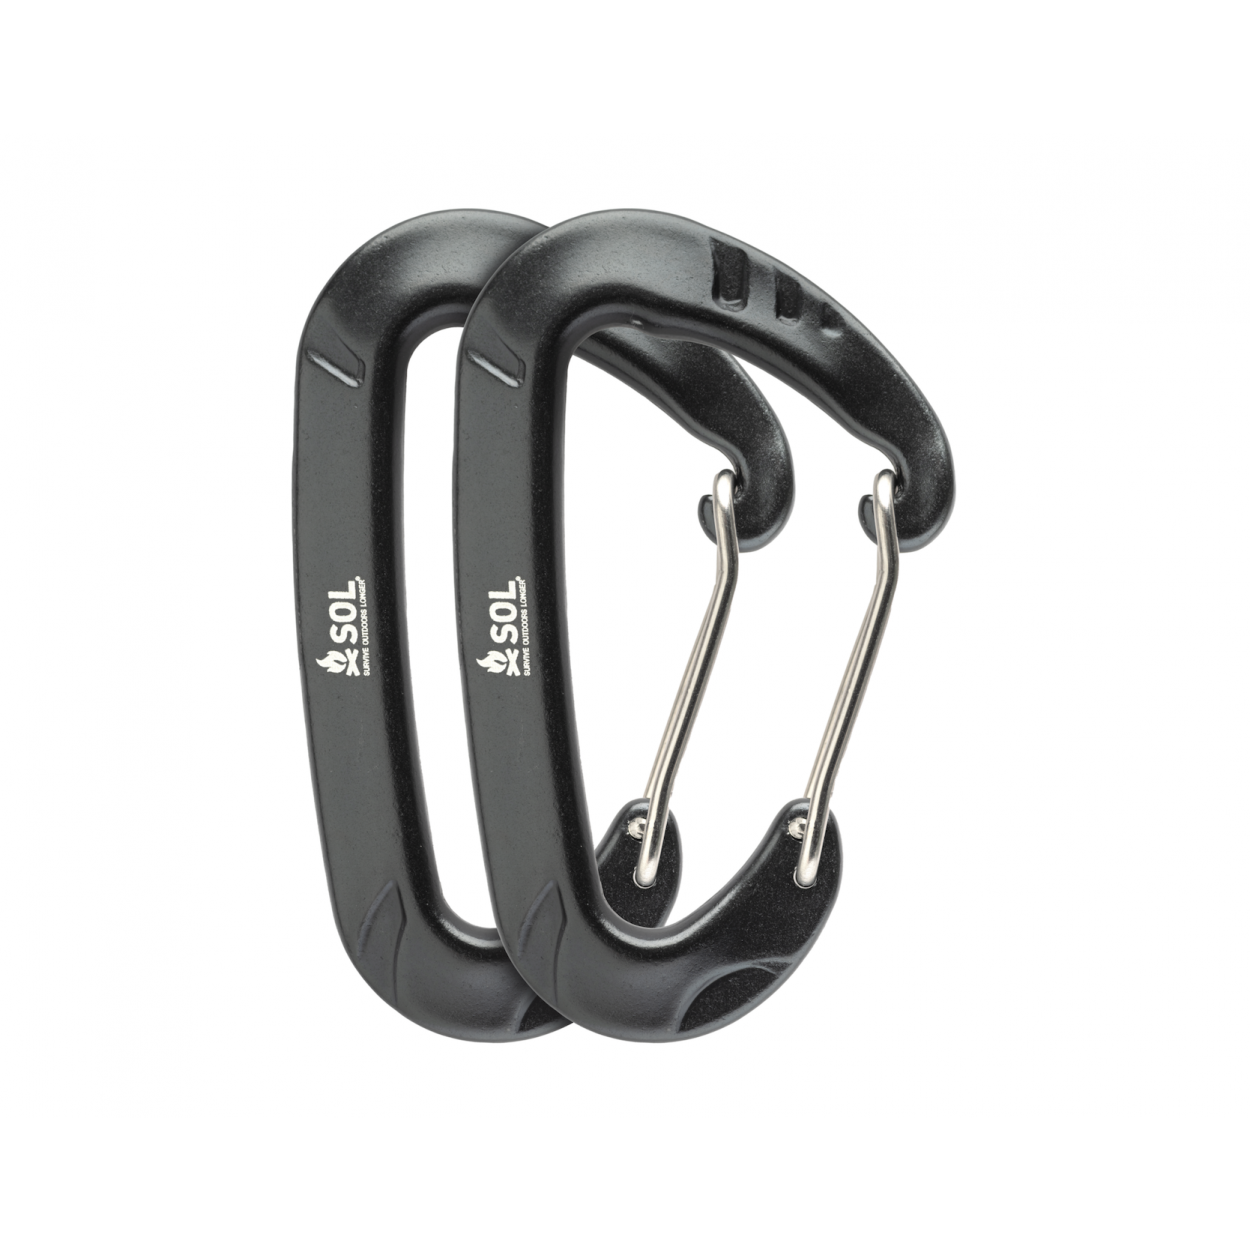 Survive Outdoors Longer Wiregate Utility Carabiners 2 Pack